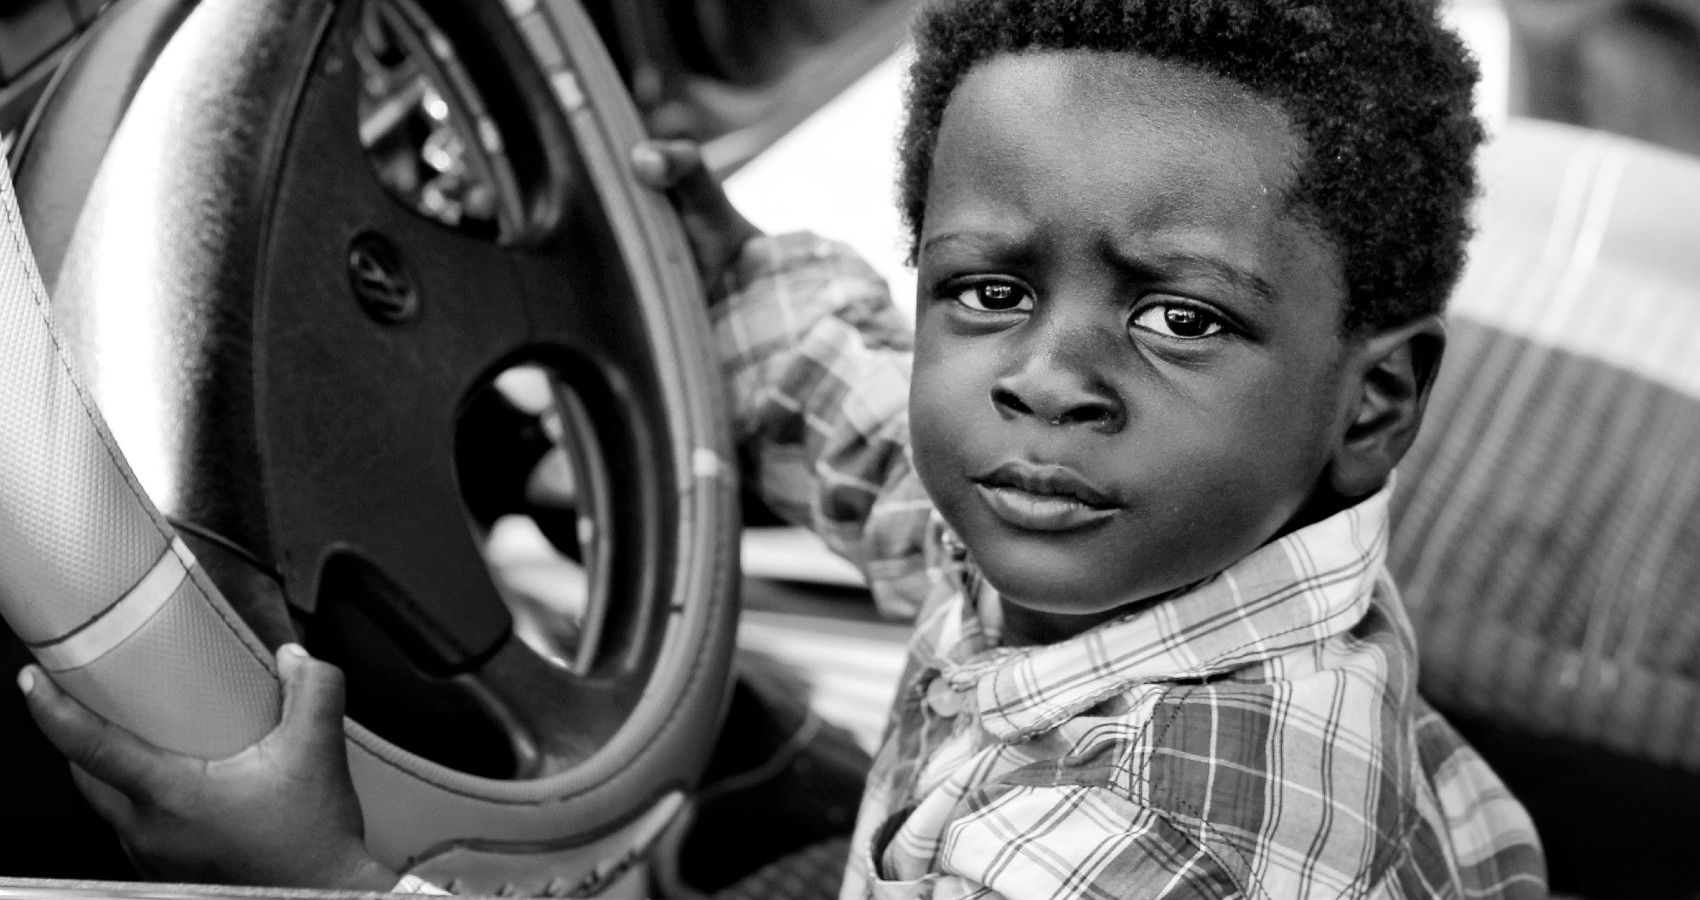 A small boy sitting in the front seat of the car at the steering wheel